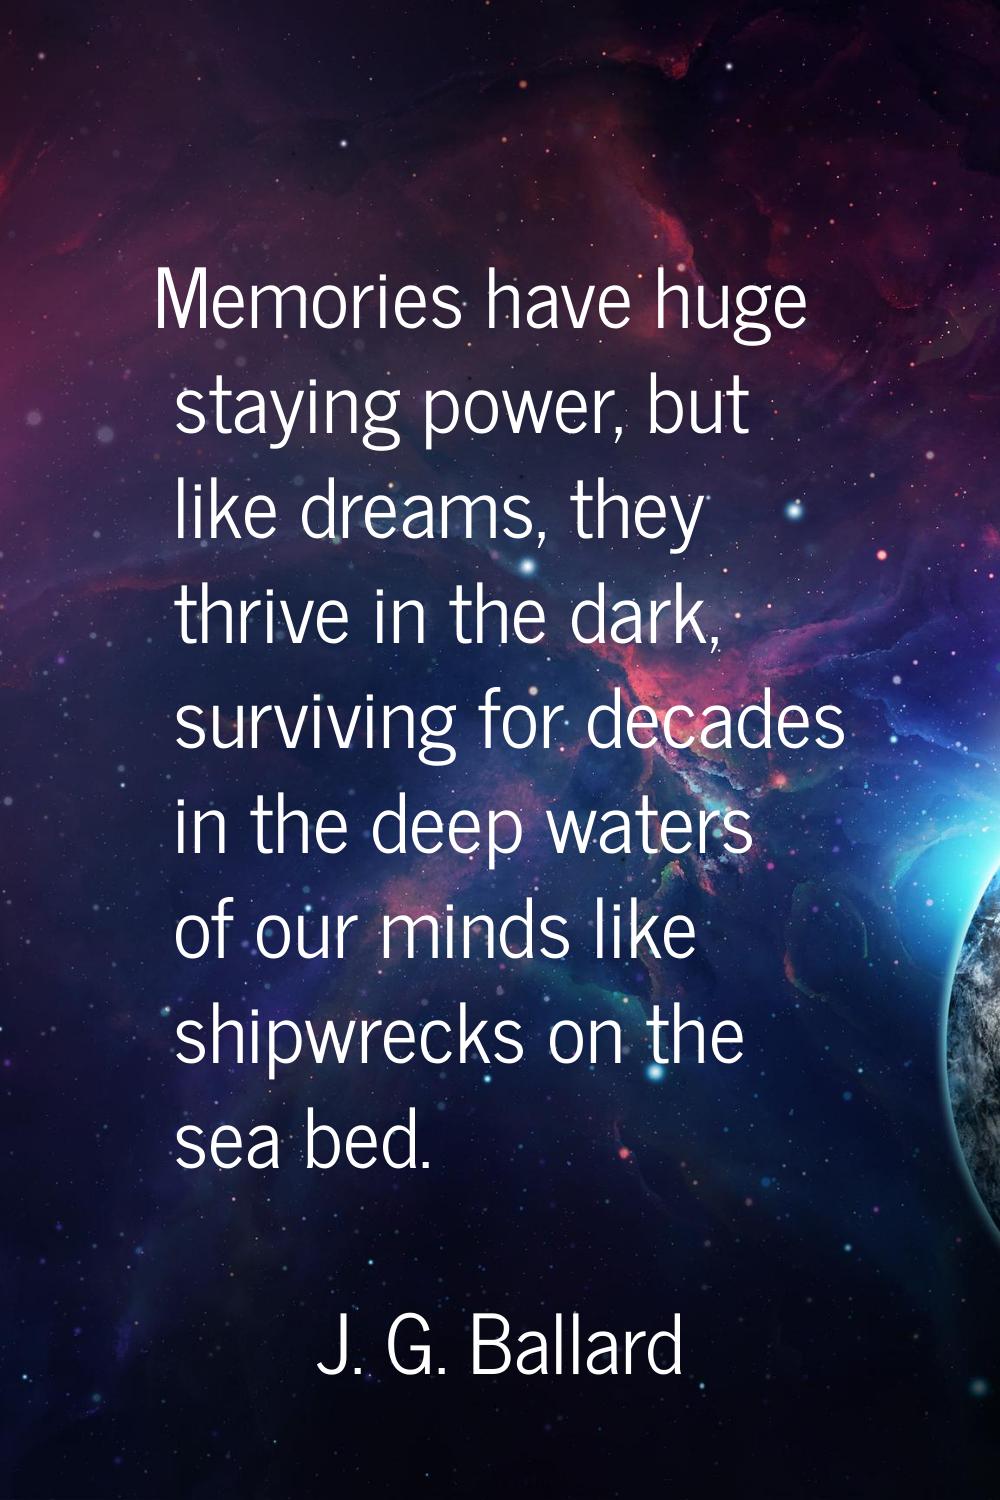 Memories have huge staying power, but like dreams, they thrive in the dark, surviving for decades i